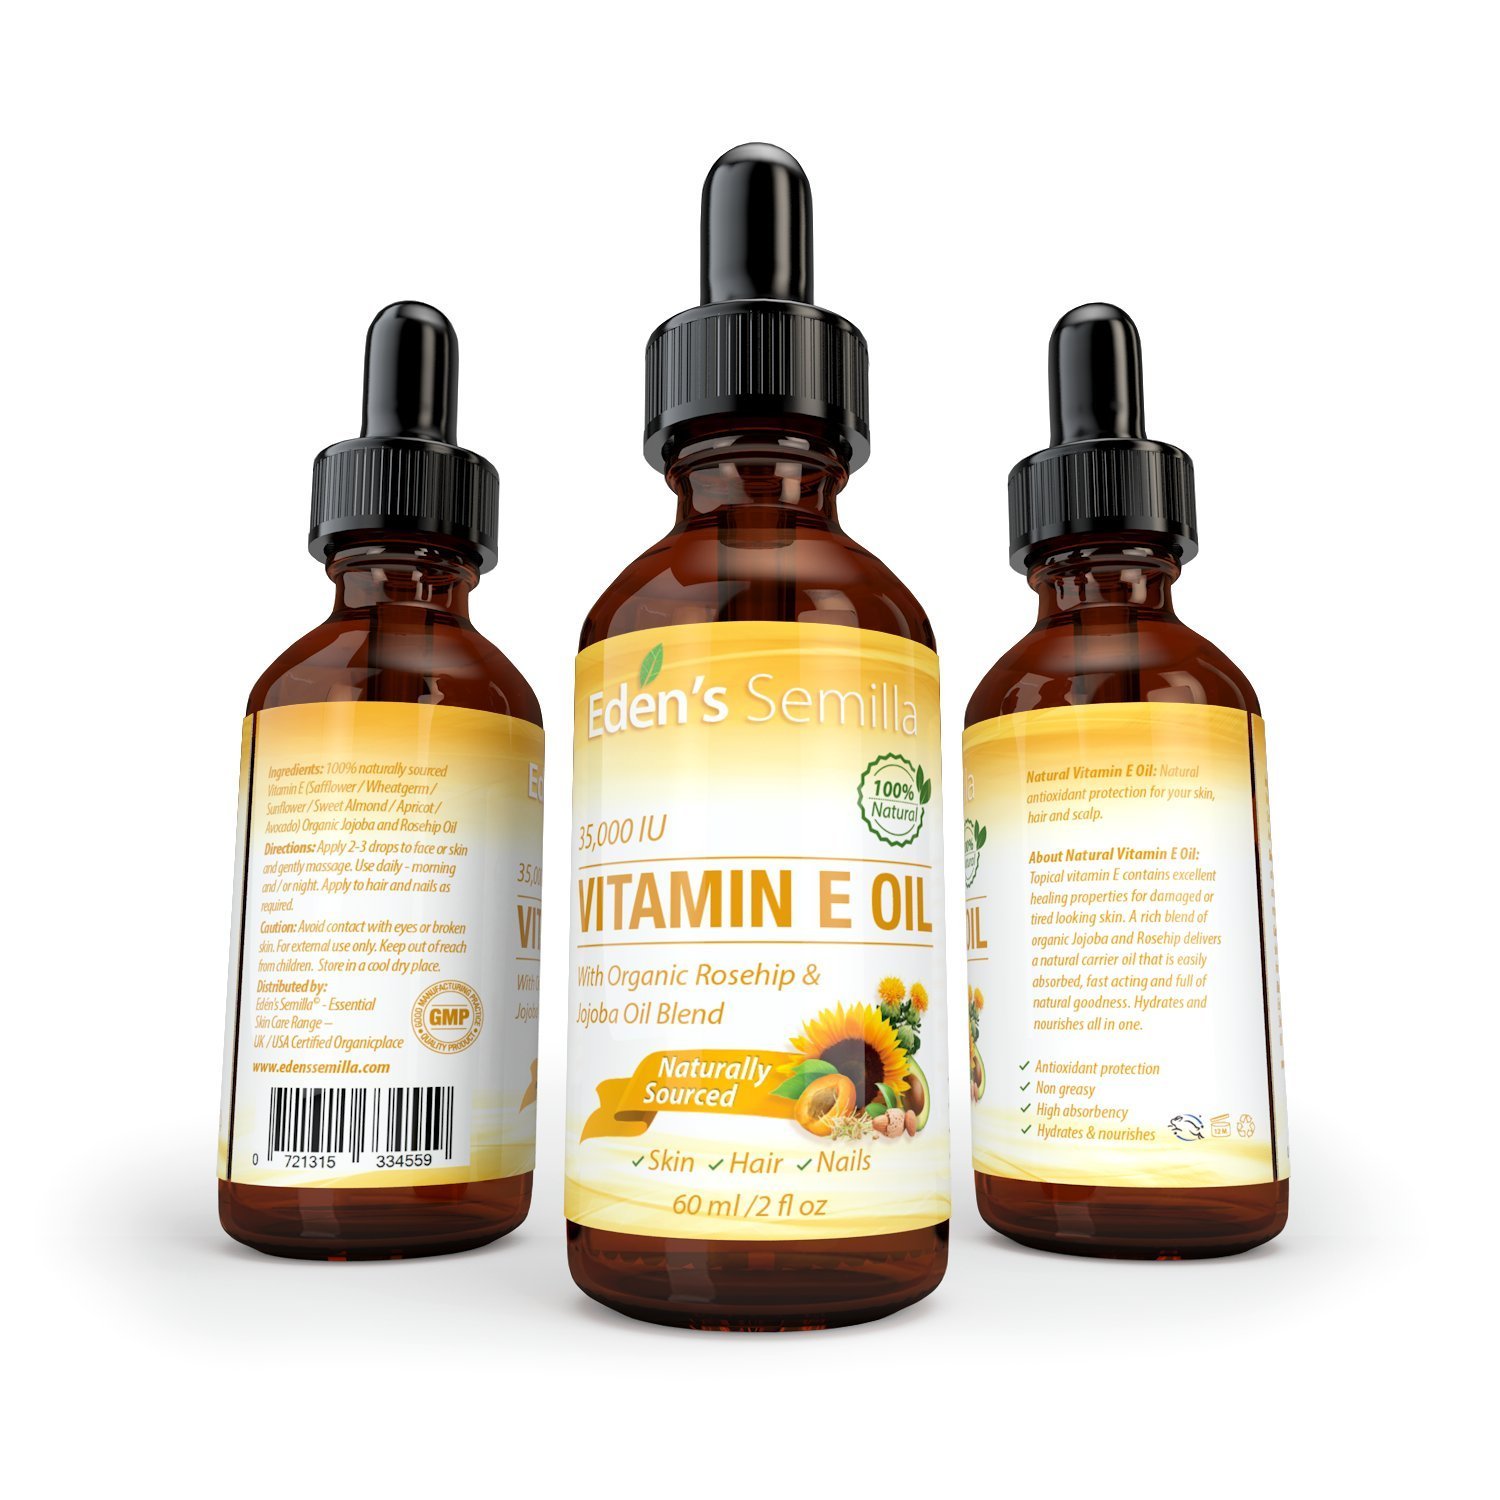 100% Natural Vitamin E Oil 35,000 IU + Organic Rosehip & Jojoba Blend - 2 OZ Bottle. FAST Absorbing Skin Protection For Face & Body. Pure Ingredients - Ideal For Sensitive Skin - Use Daily - image 2 of 4